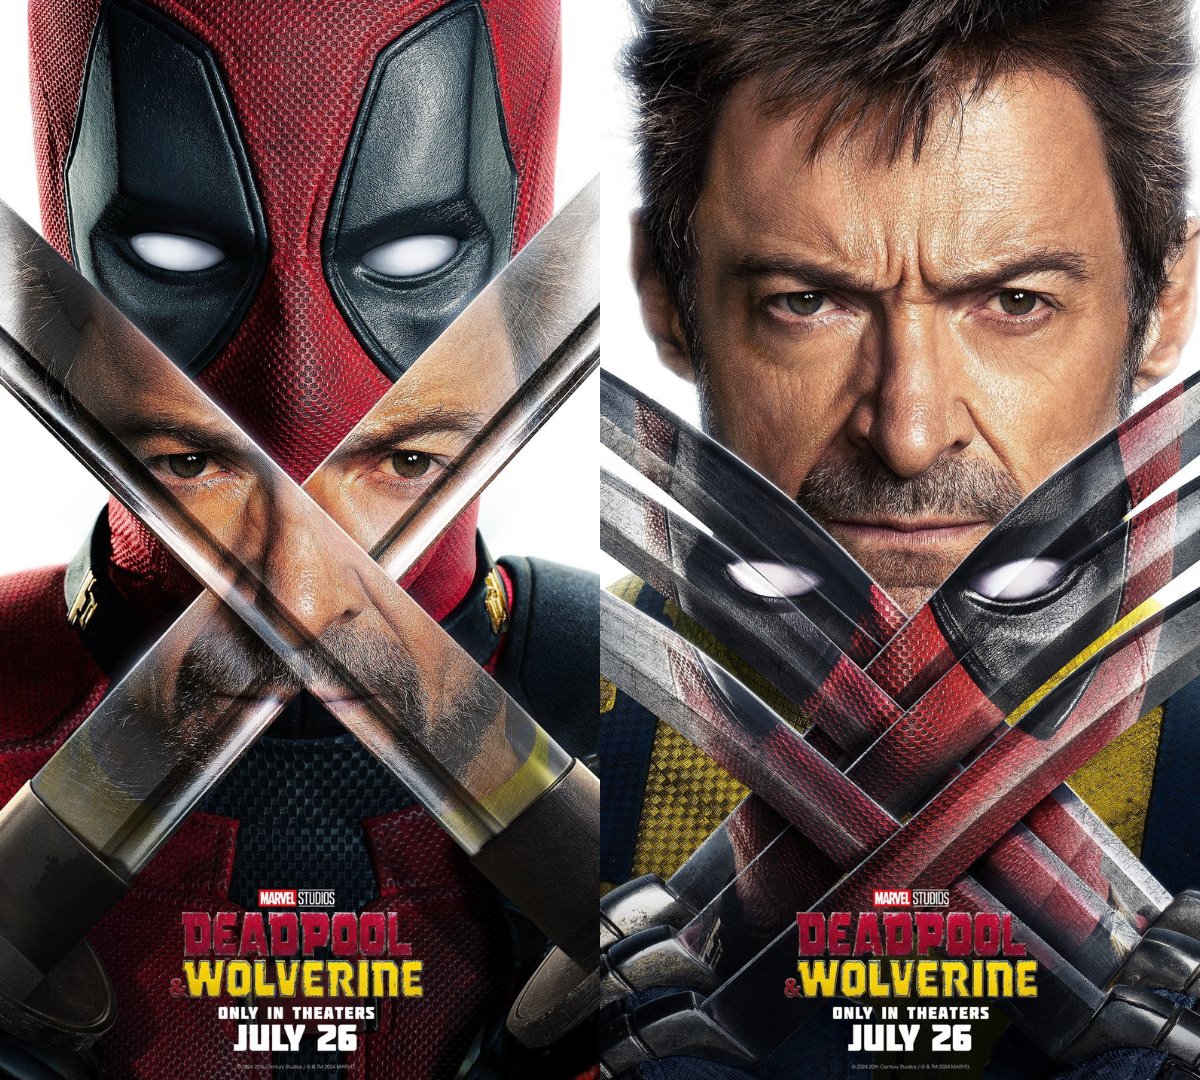 New posters for Deadpool and Wolverine.